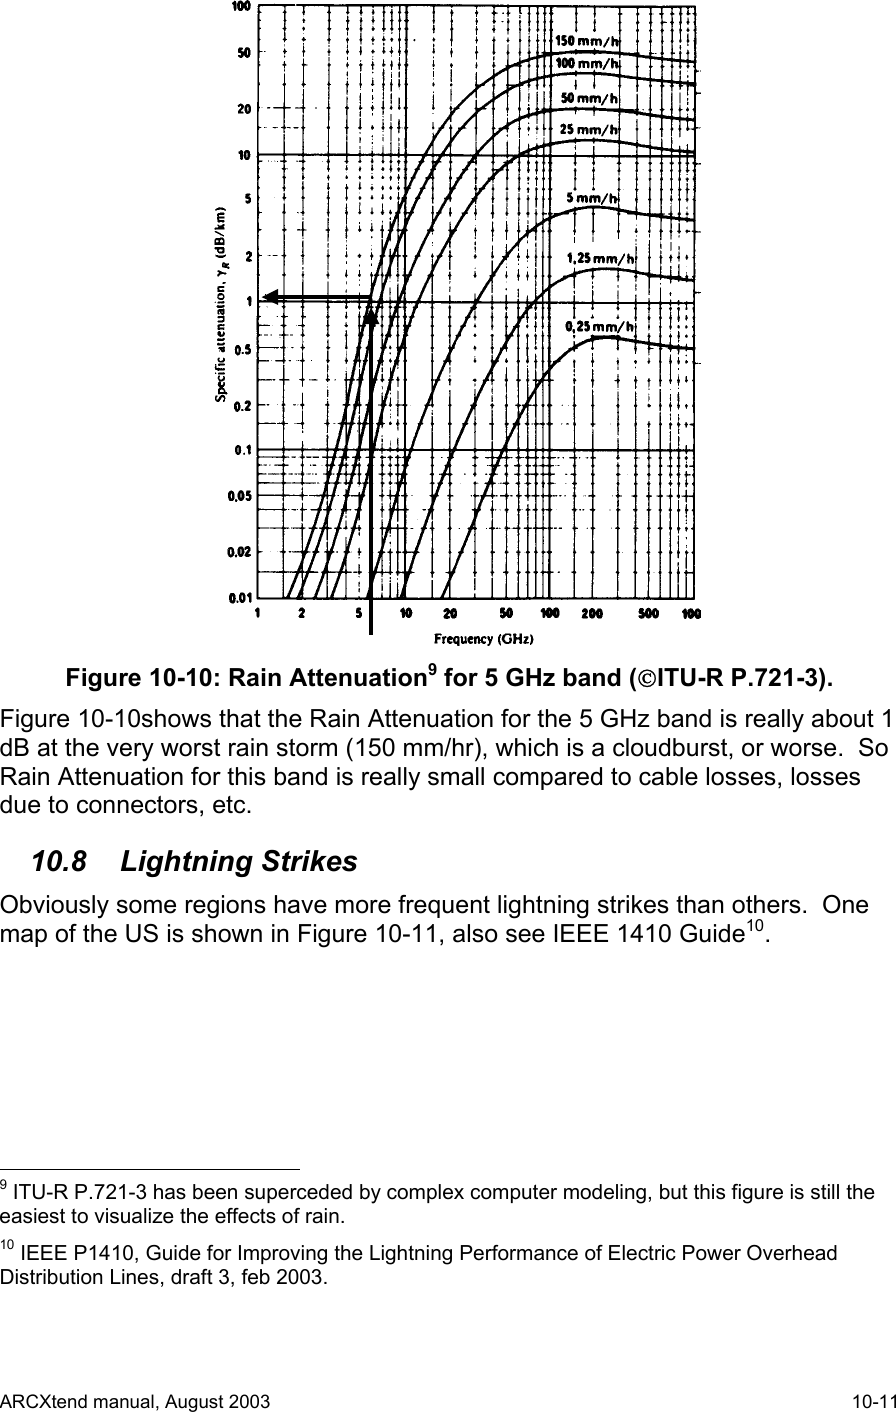   Figure 10-10: Rain Attenuation9 for 5 GHz band (ITU-R P.721-3).  Figure 10-10shows that the Rain Attenuation for the 5 GHz band is really about 1 dB at the very worst rain storm (150 mm/hr), which is a cloudburst, or worse.  So Rain Attenuation for this band is really small compared to cable losses, losses due to connectors, etc. 10.8 Lightning Strikes Obviously some regions have more frequent lightning strikes than others.  One map of the US is shown in Figure 10-11, also see IEEE 1410 Guide10.                                             9 ITU-R P.721-3 has been superceded by complex computer modeling, but this figure is still the easiest to visualize the effects of rain. 10 IEEE P1410, Guide for Improving the Lightning Performance of Electric Power Overhead Distribution Lines, draft 3, feb 2003.  ARCXtend manual, August 2003    10-11 